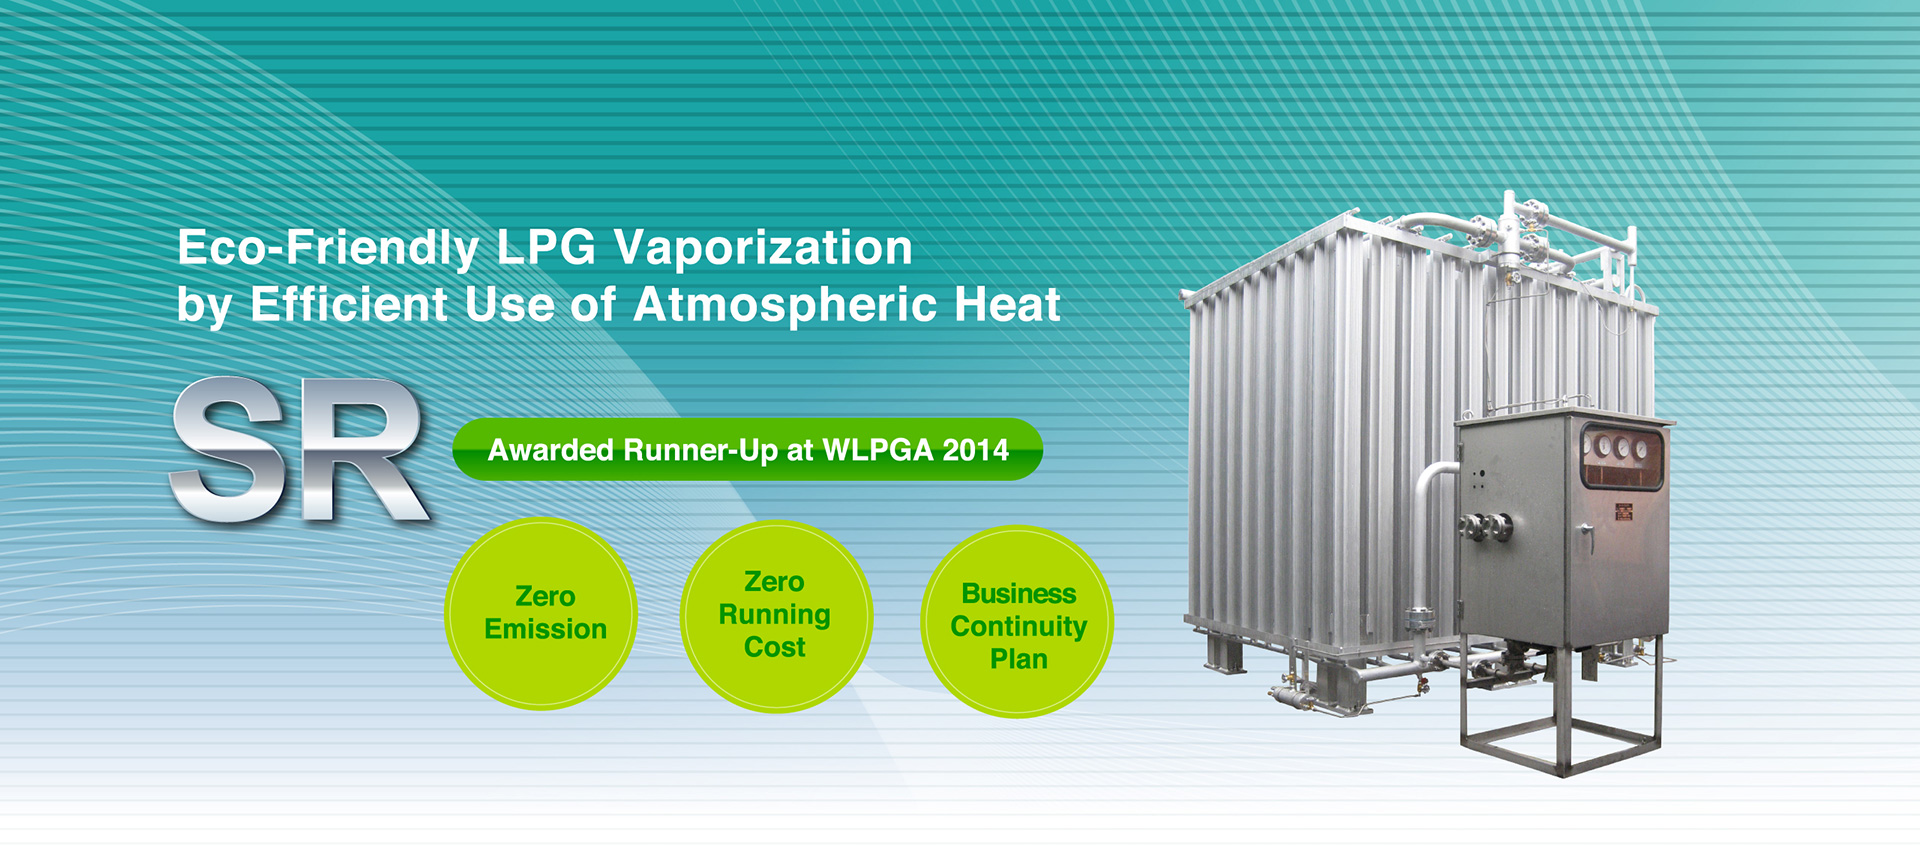 Eco-Friendly LPG Vaporization by Efficient Use of Atmospheric Heat [SR]